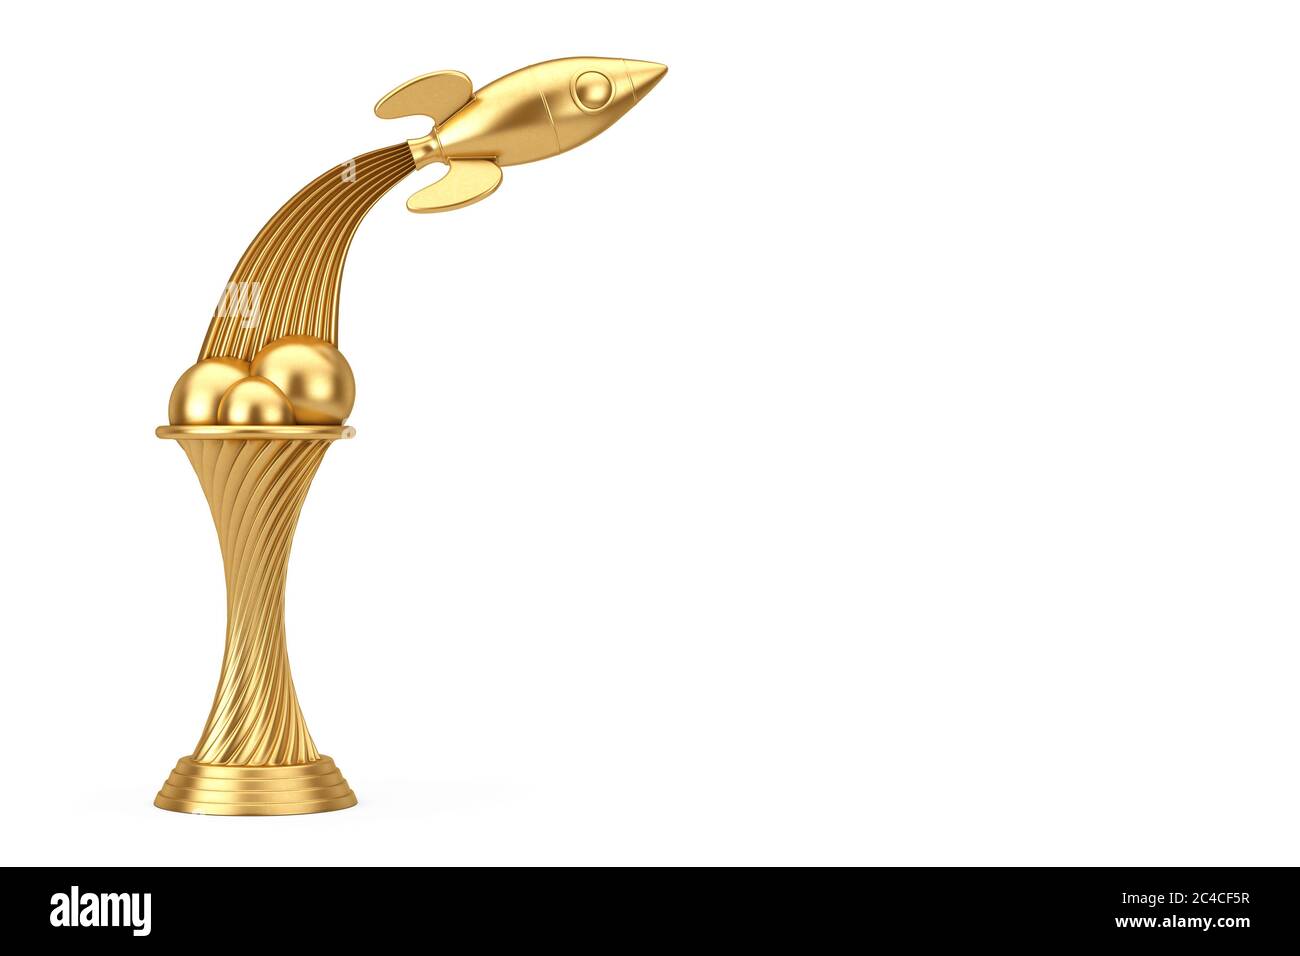 Space Exploration Concept. Golden Award Trophy Fly Up Rocket on a white background. 3d Rendering Stock Photo